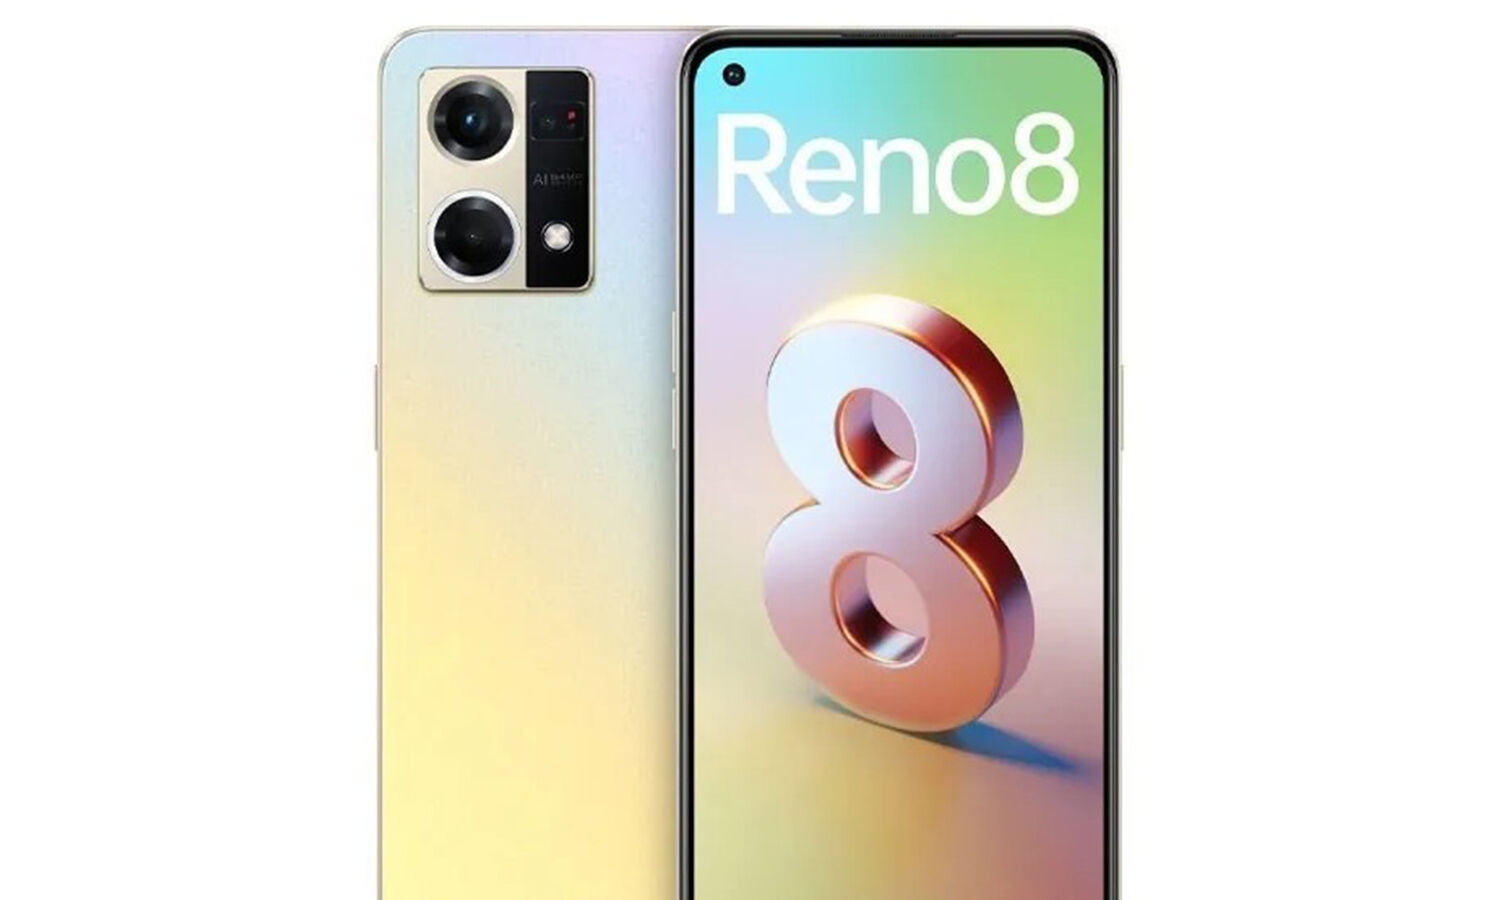 OPPO Reno8 4G: Oppo will launch this smartphone with 12GB RAM in India, know what are the special features